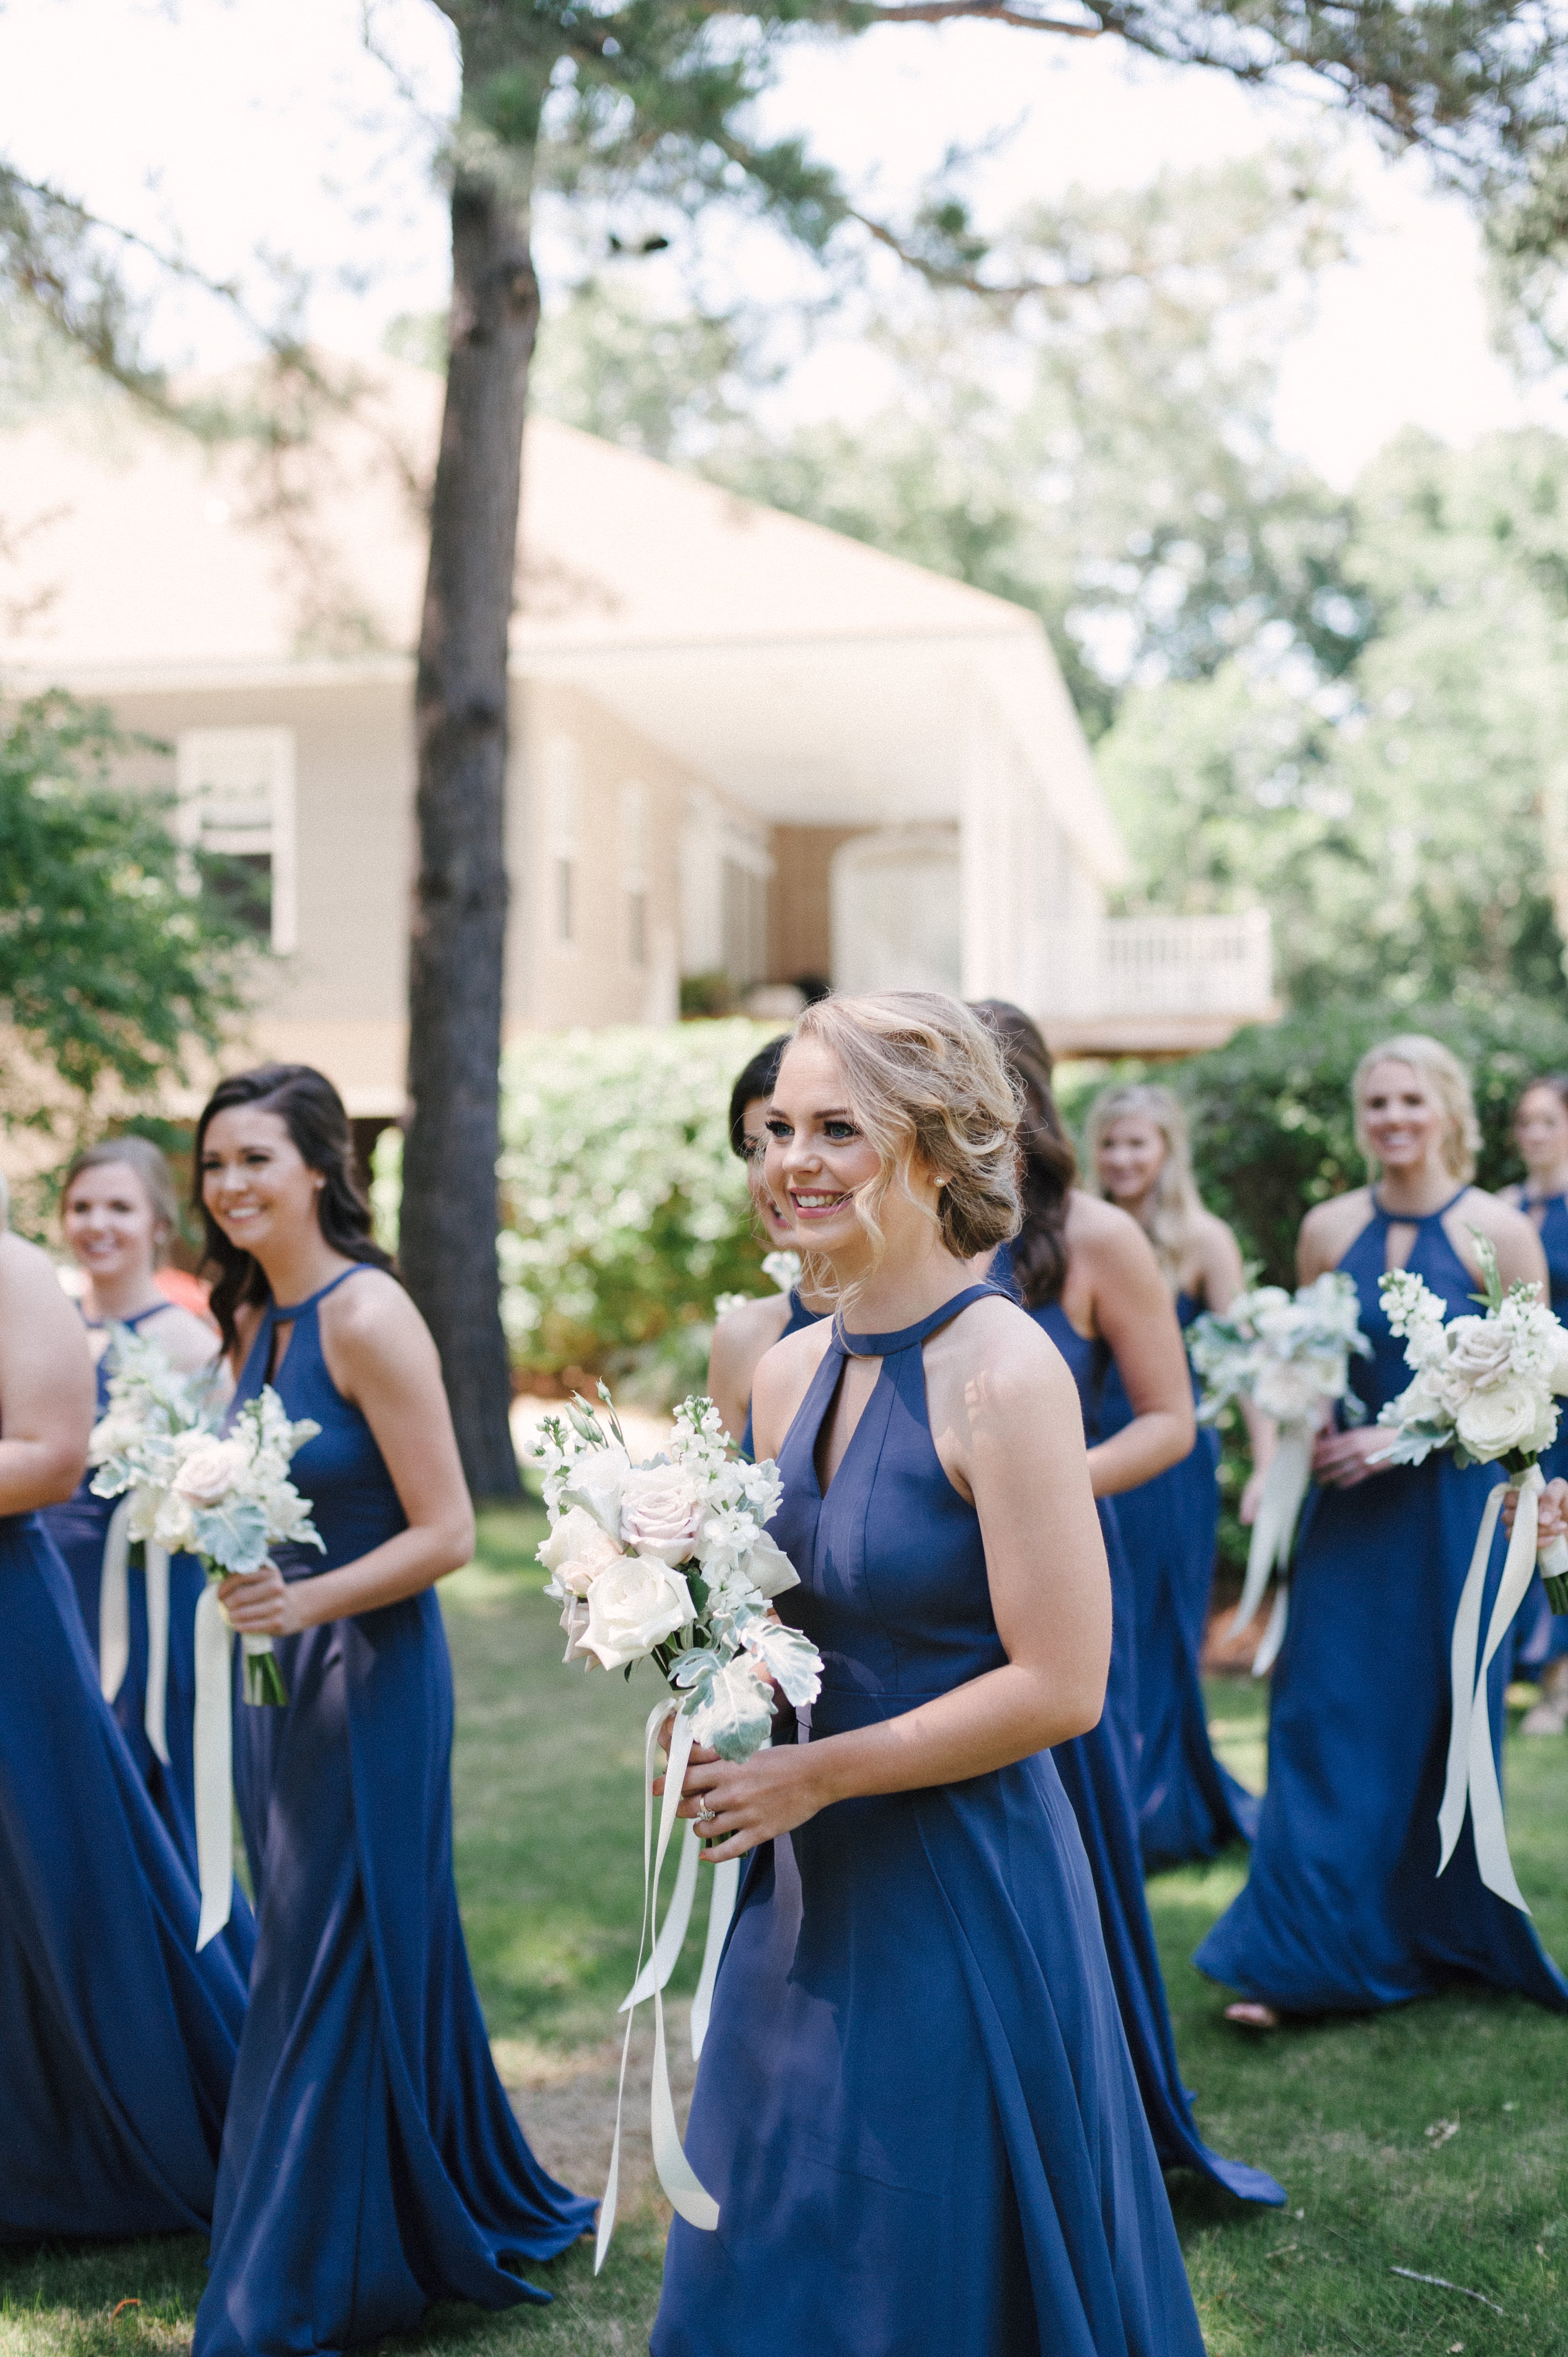 Pretty bridesmaid with an updo hairstyle walking with other bridesmaids at a residence in Montgomery, AL